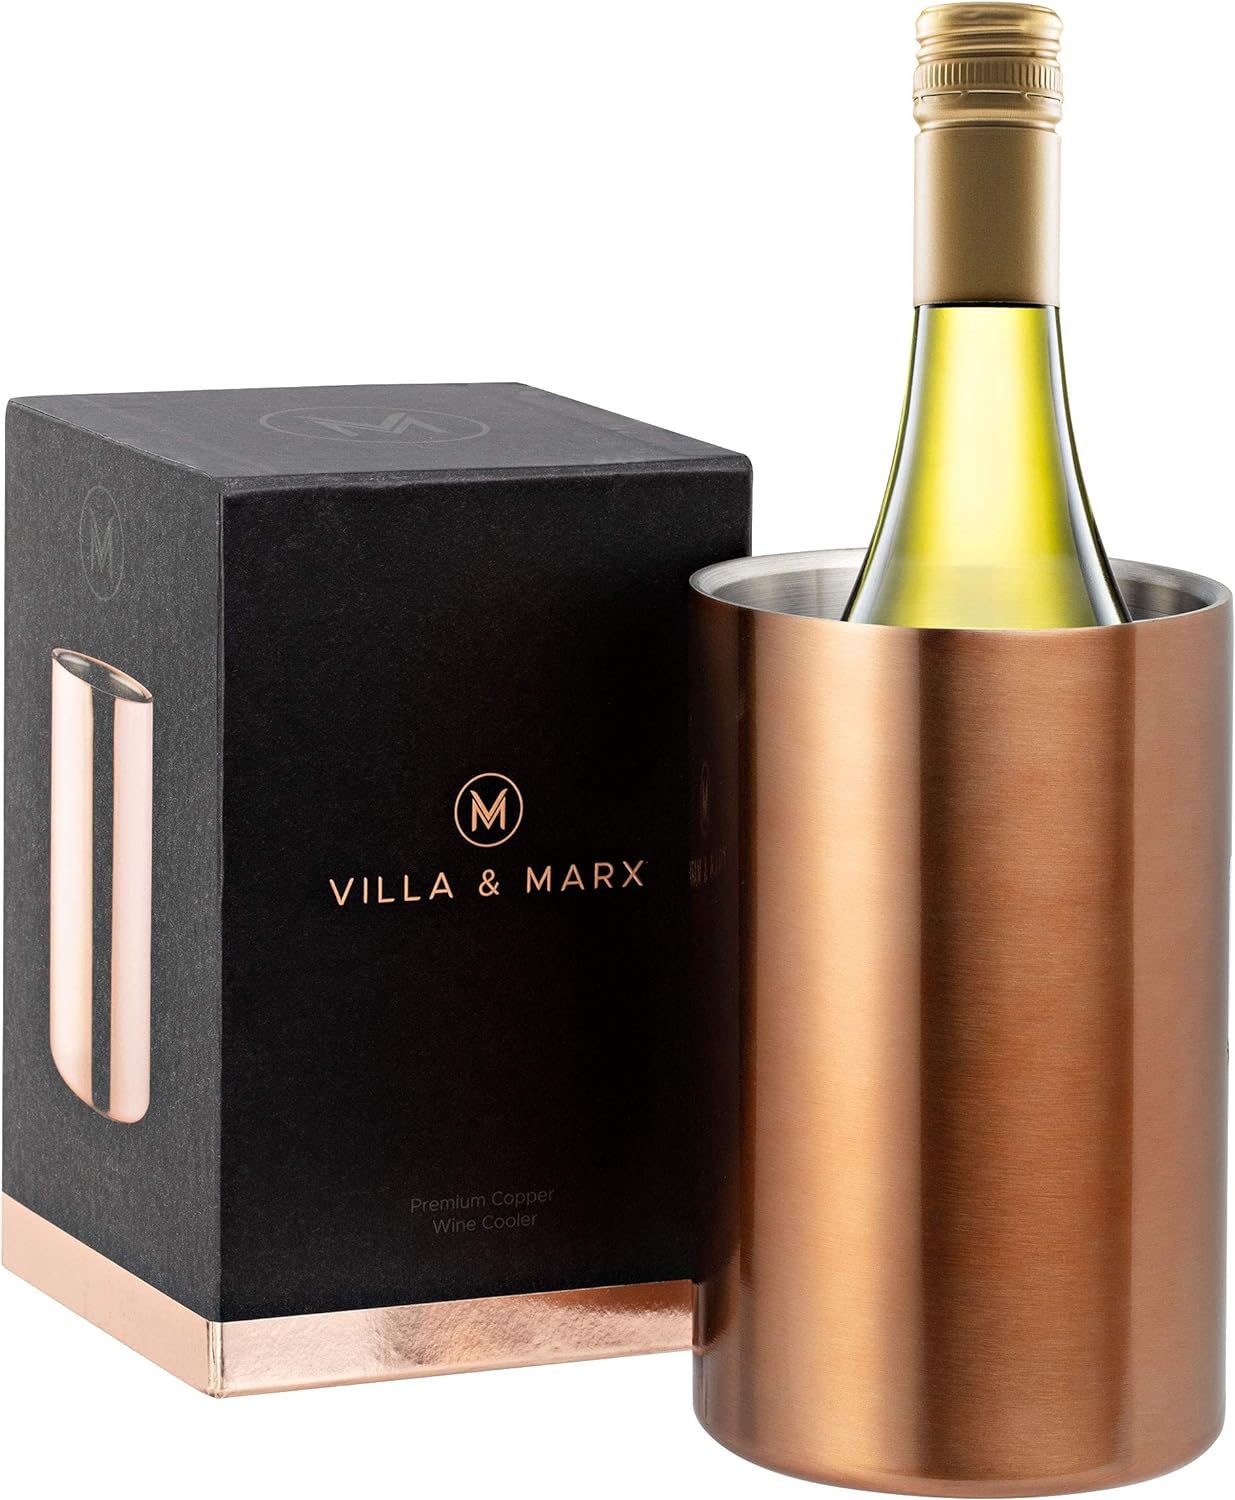 Villa & Marx Wine Chiller Bucket - Premium Champagne Bucket Keeps 750ml Bottles Cold for Hours - Insulated White Wine Bottle Cooler Without Ice - Wine Cooler Bucket for Wine Lovers (Copper)